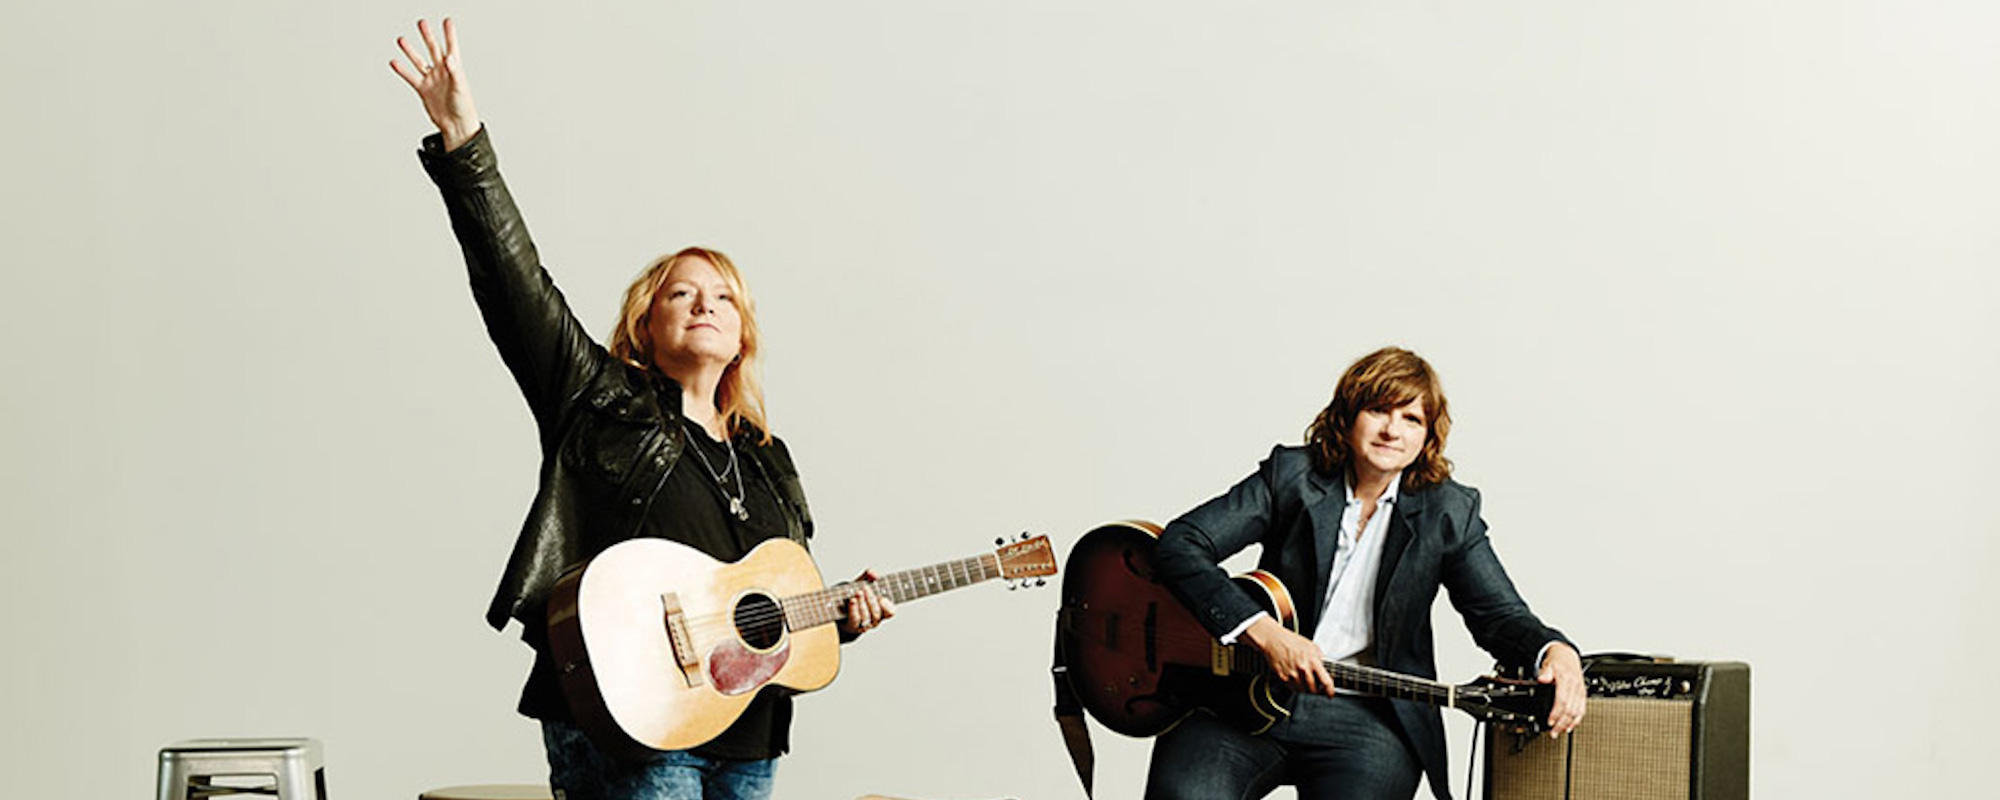 Indigo Girls Perform ‘Look Long,’ Rarities, and Share Stories Behind the Songs in New Concert Film